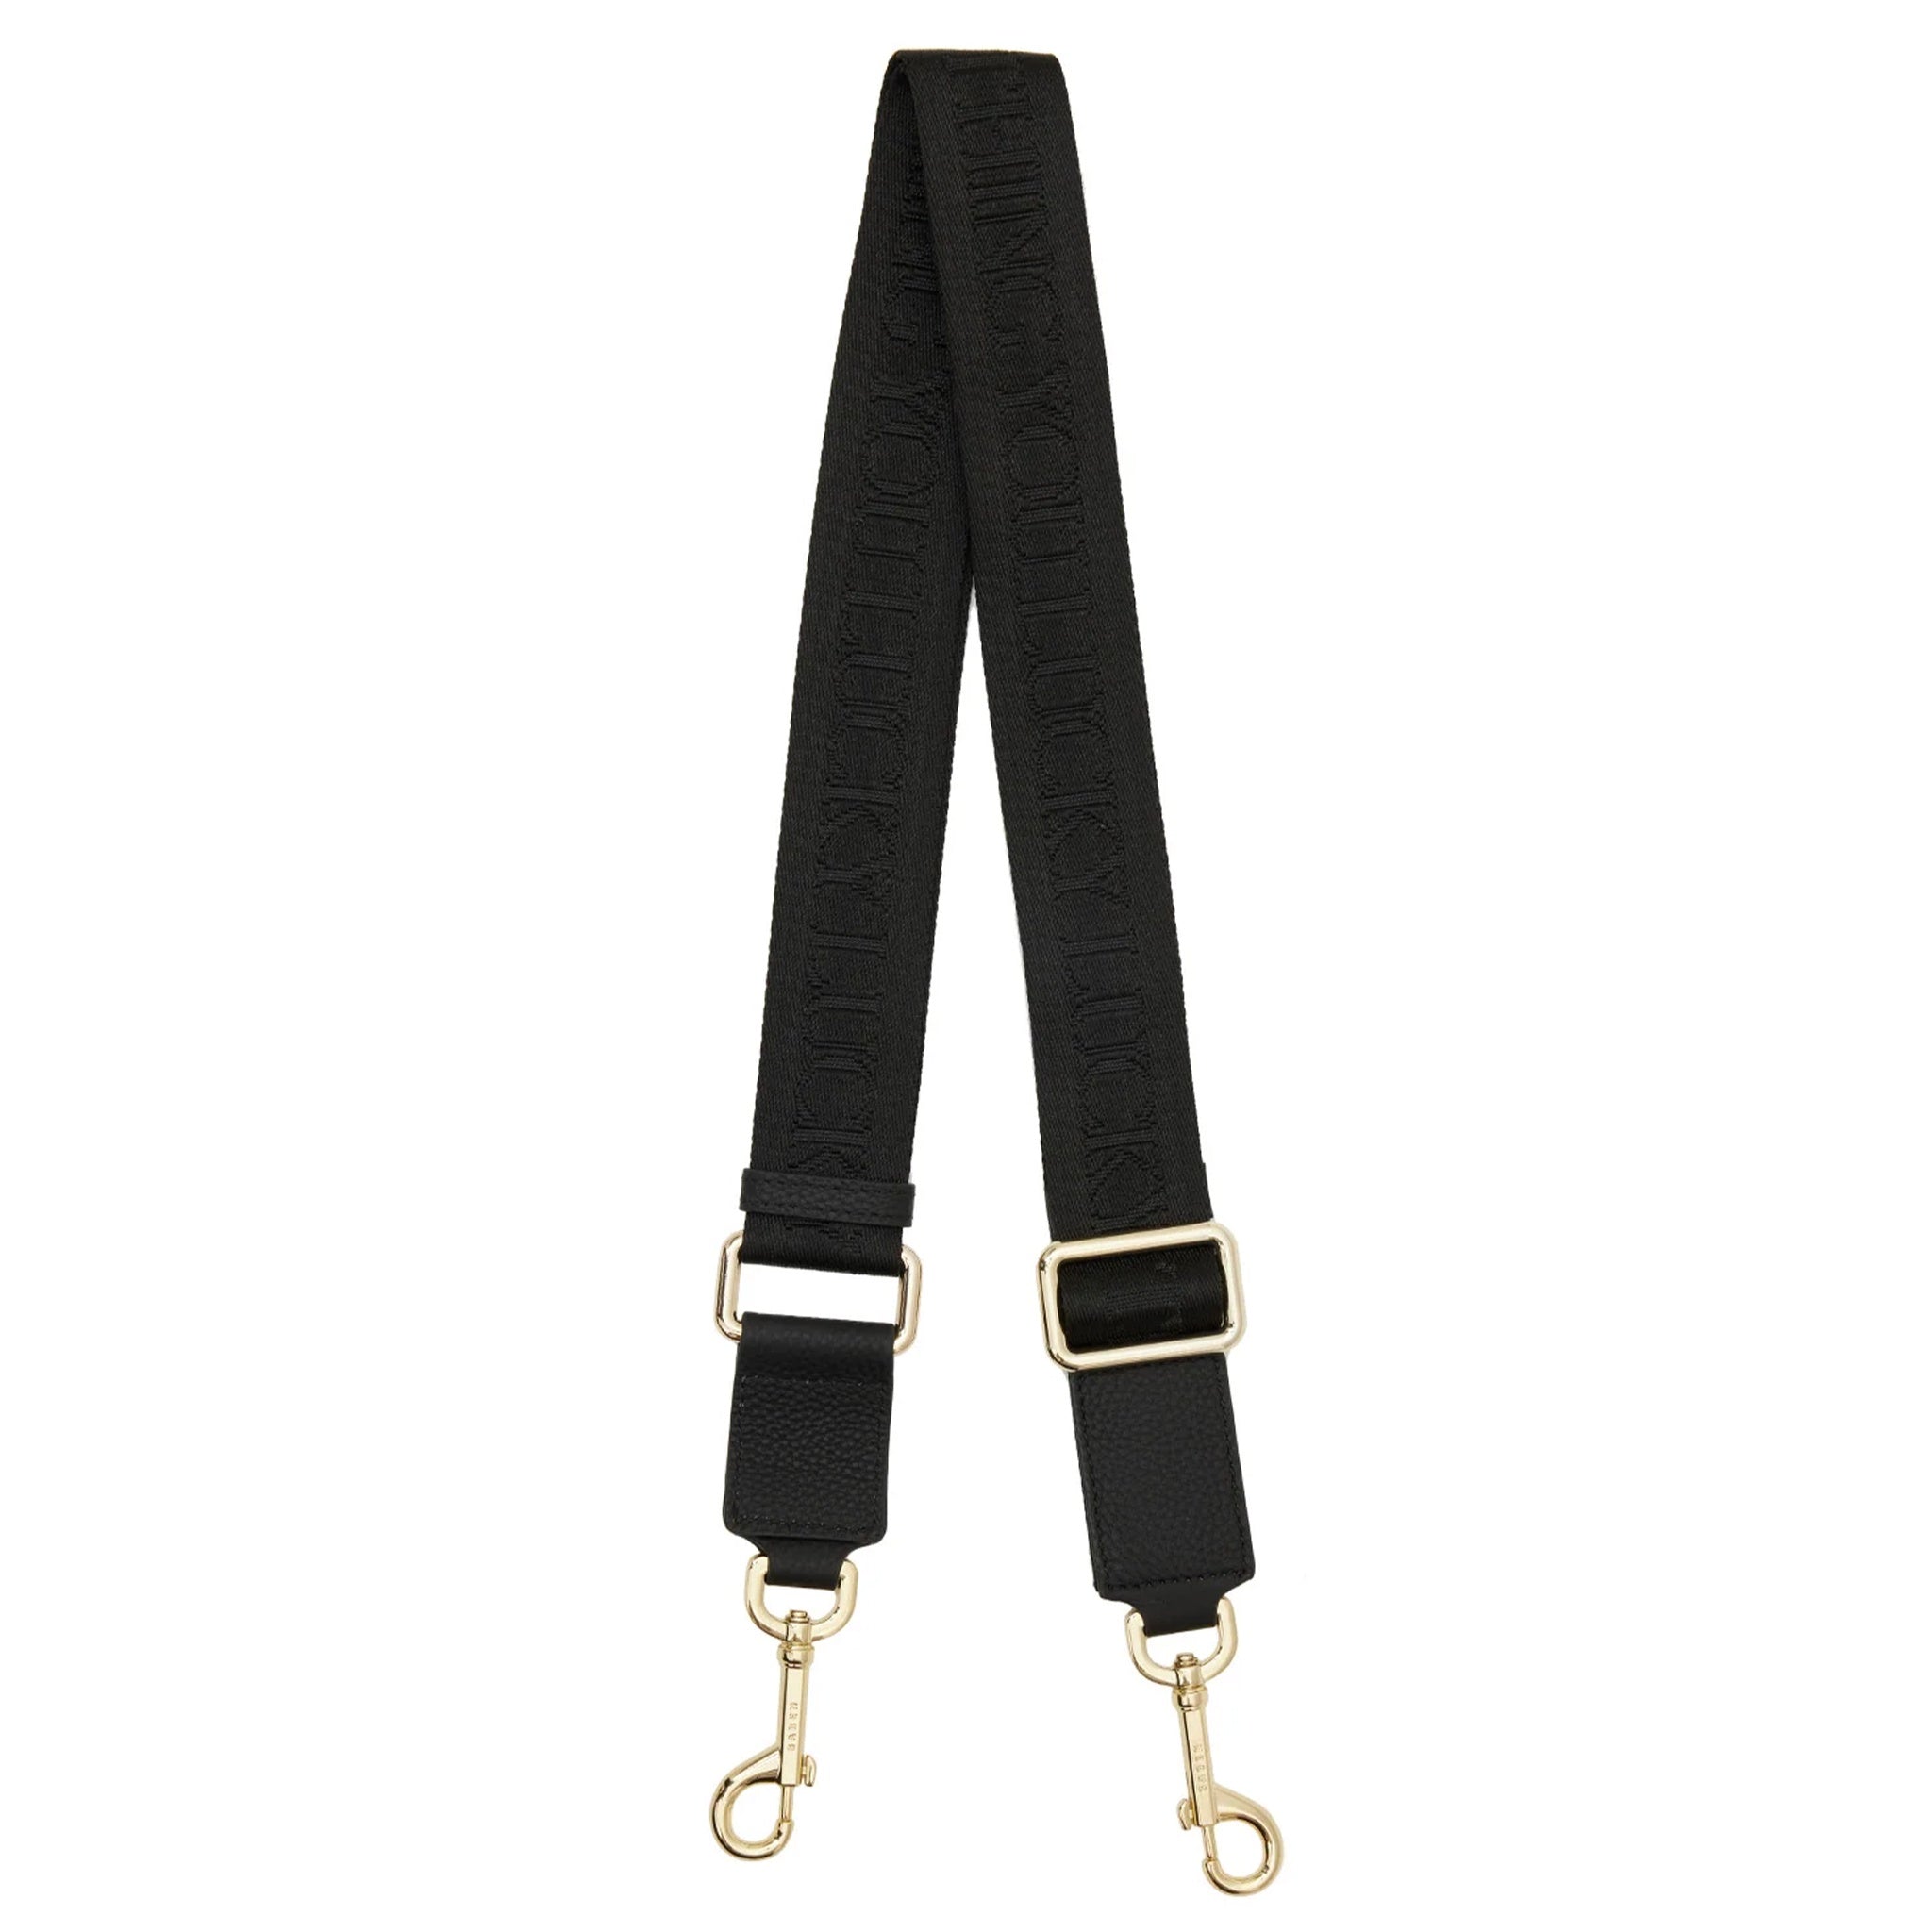 Saben Feature Strap - Black Lucky Thing